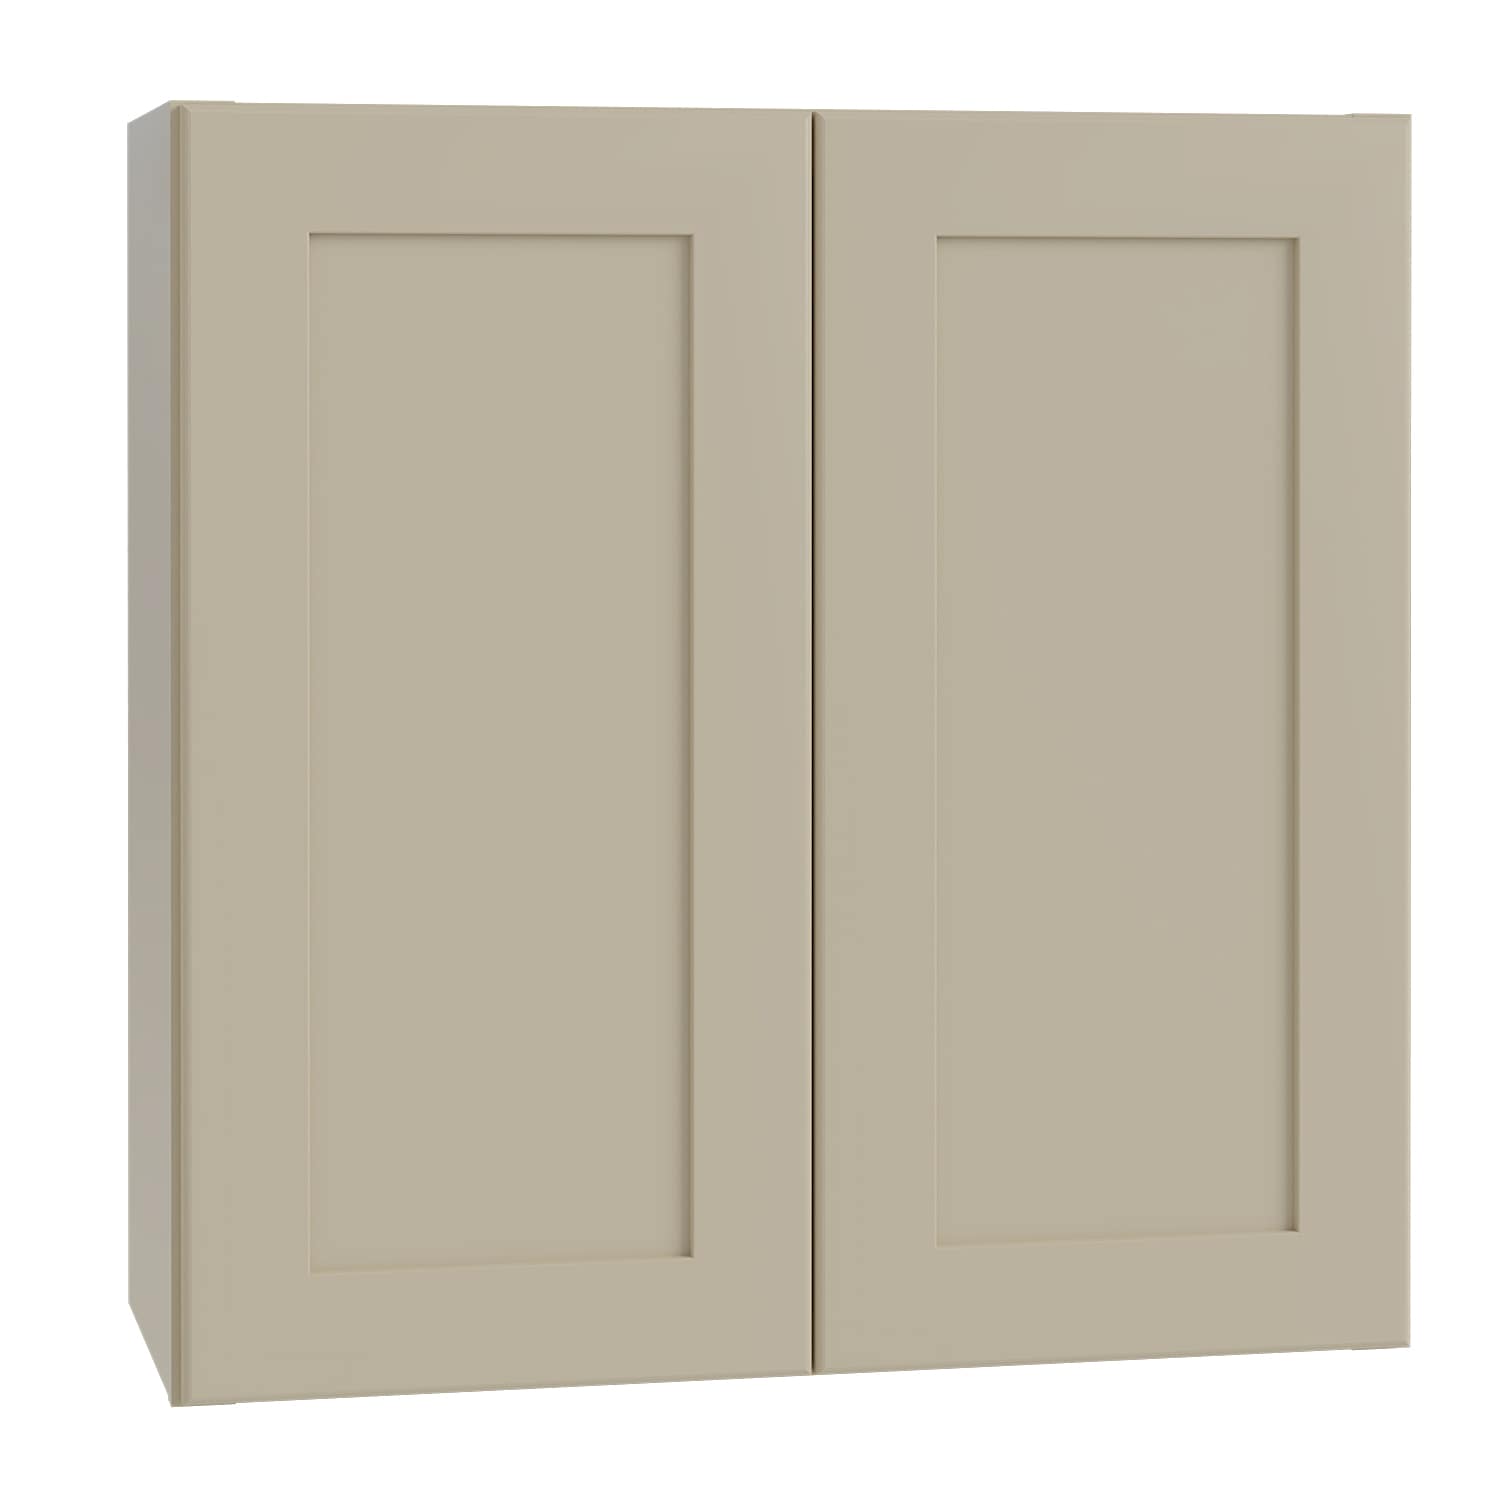 Luxxe Cabinetry 24-in W x 30-in H x 12-in D Norfolk Blended Cream Painted Door Wall Fully Assembled Semi-custom Cabinet in Off-White | W2430-NBC